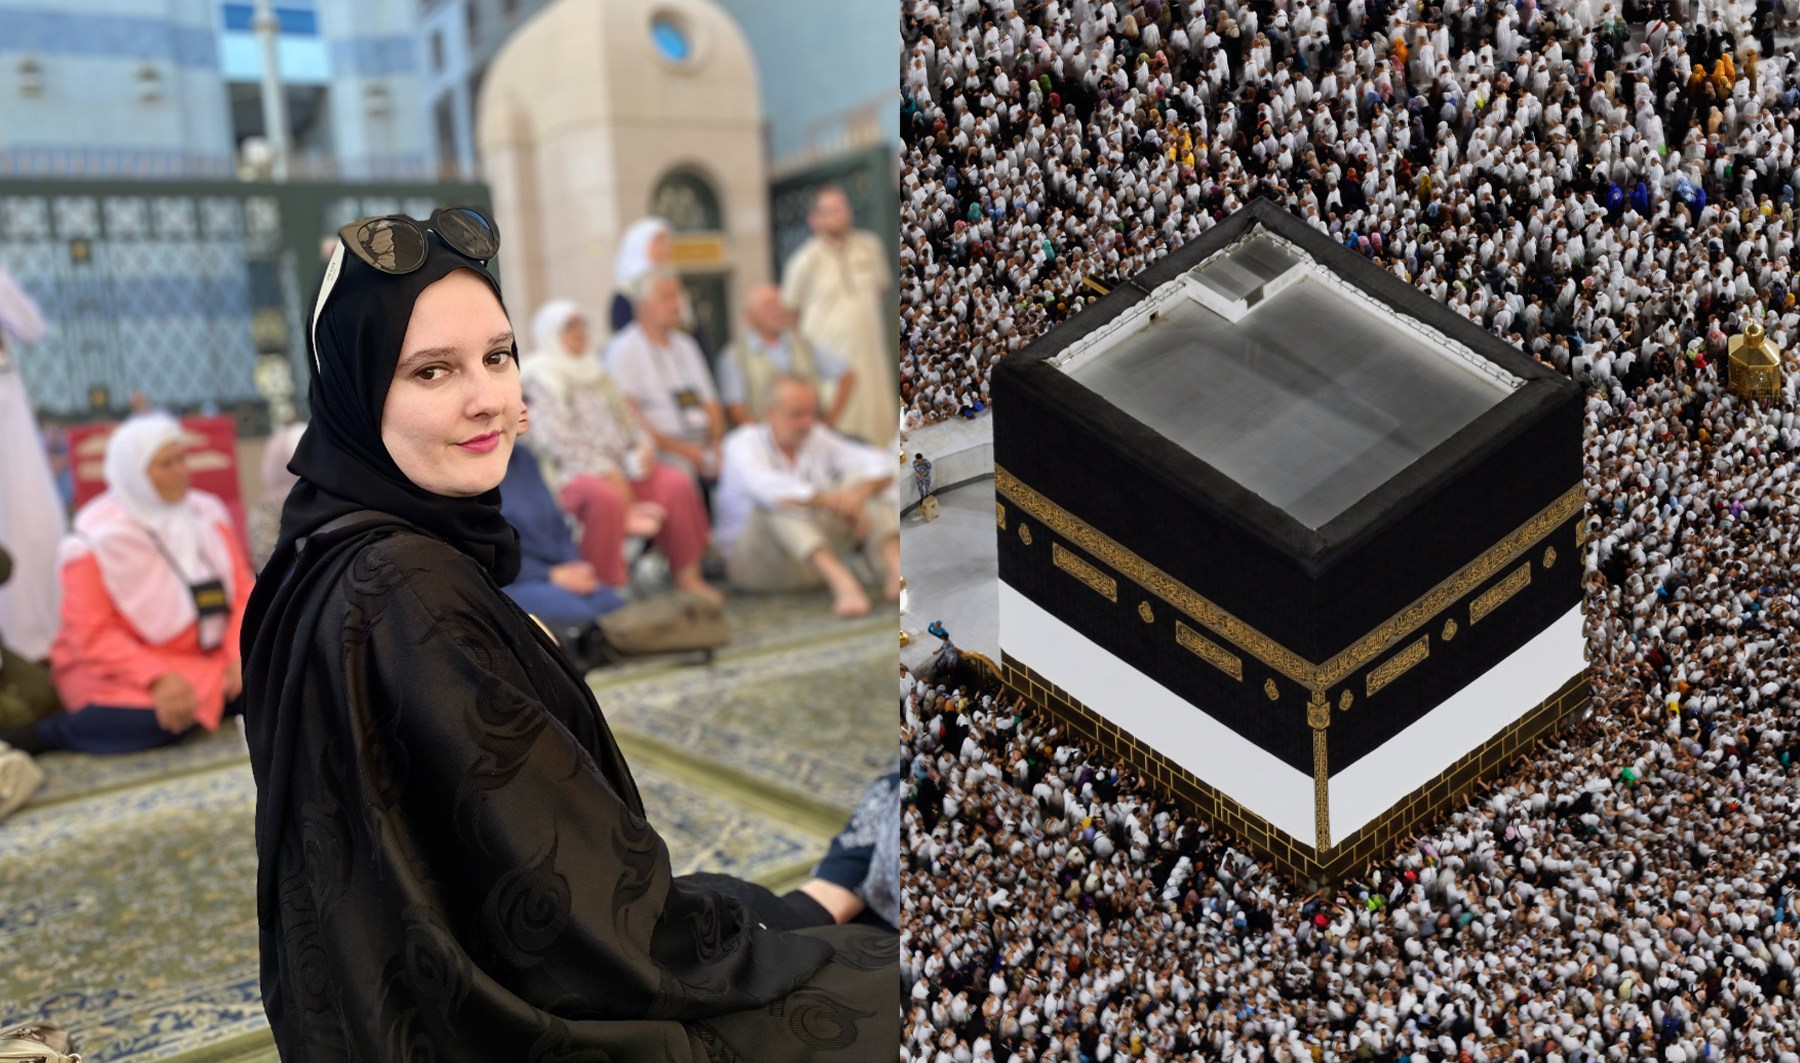 HOSTED_Almas-simple-guide-to-Hajj_-WIDE-THUMB-CLEAN-1718275534.jpg